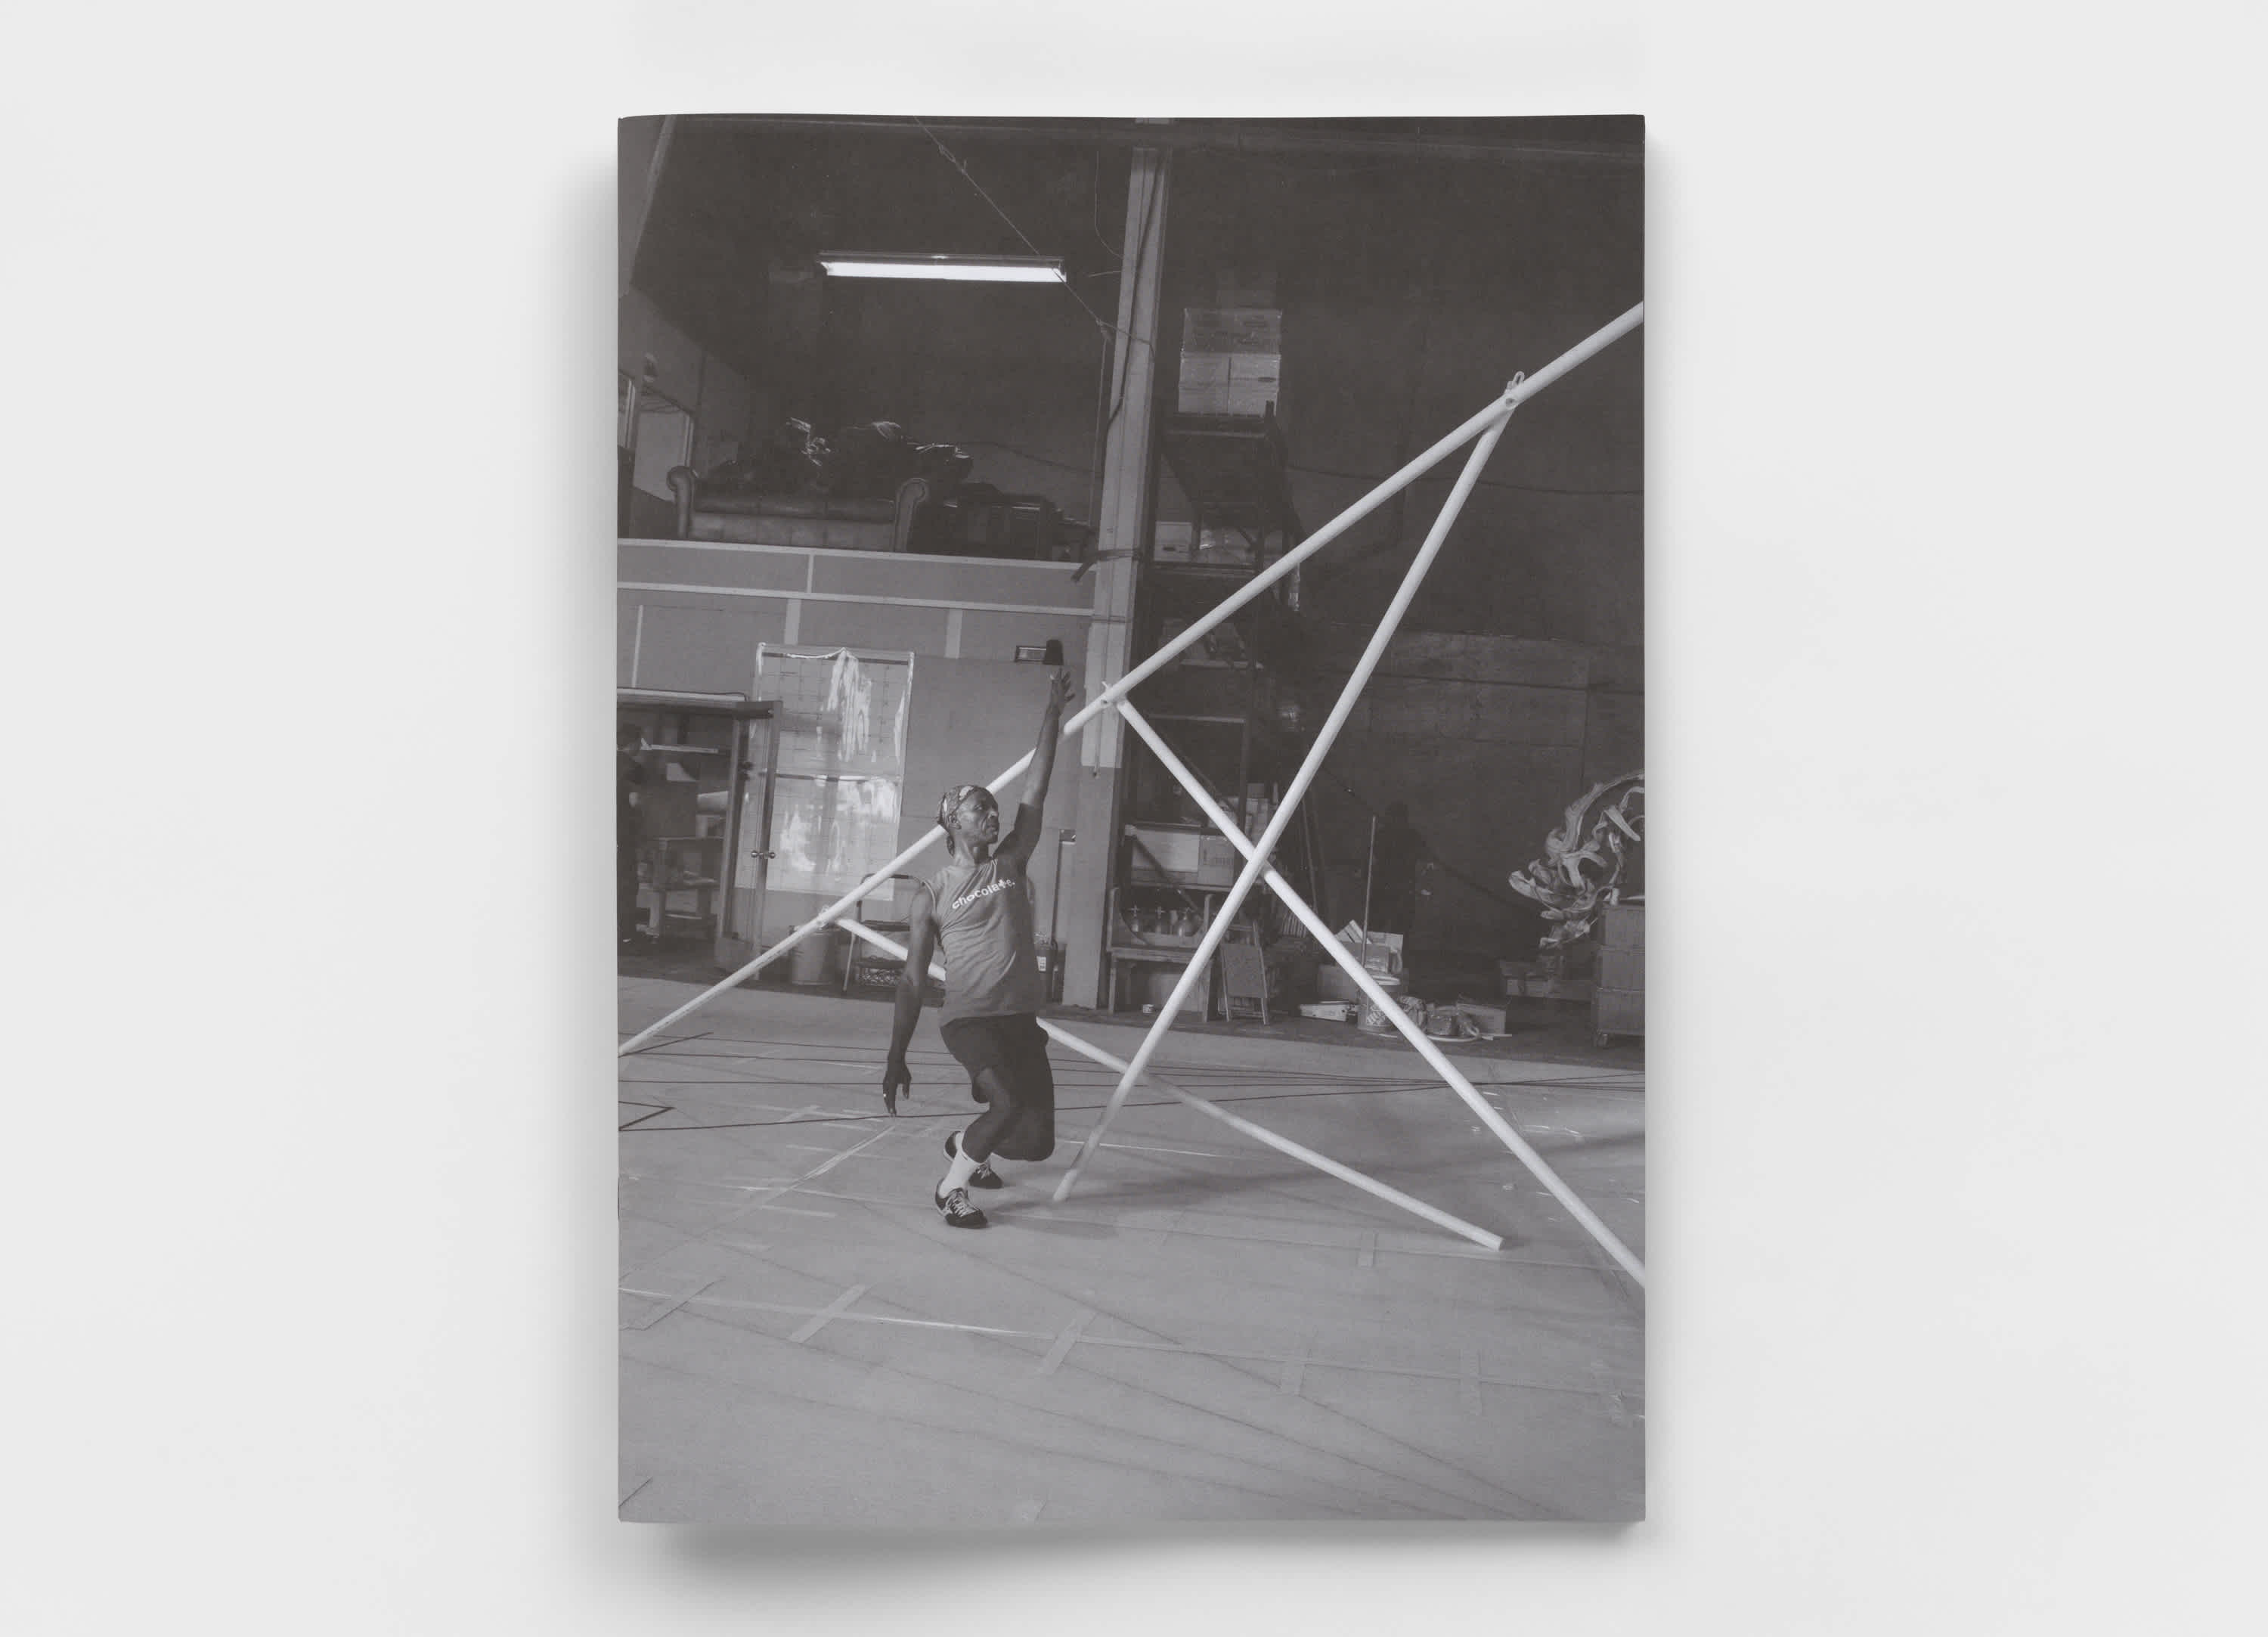 Black and white book cover is on top of a gray background. The cover features a dancer on his way toward taking a knee. His fist is raised and he is positioned in front of four criss-crossing white PVC poles. A large gymnastics mat covers the floor of the warehouse room he is in.